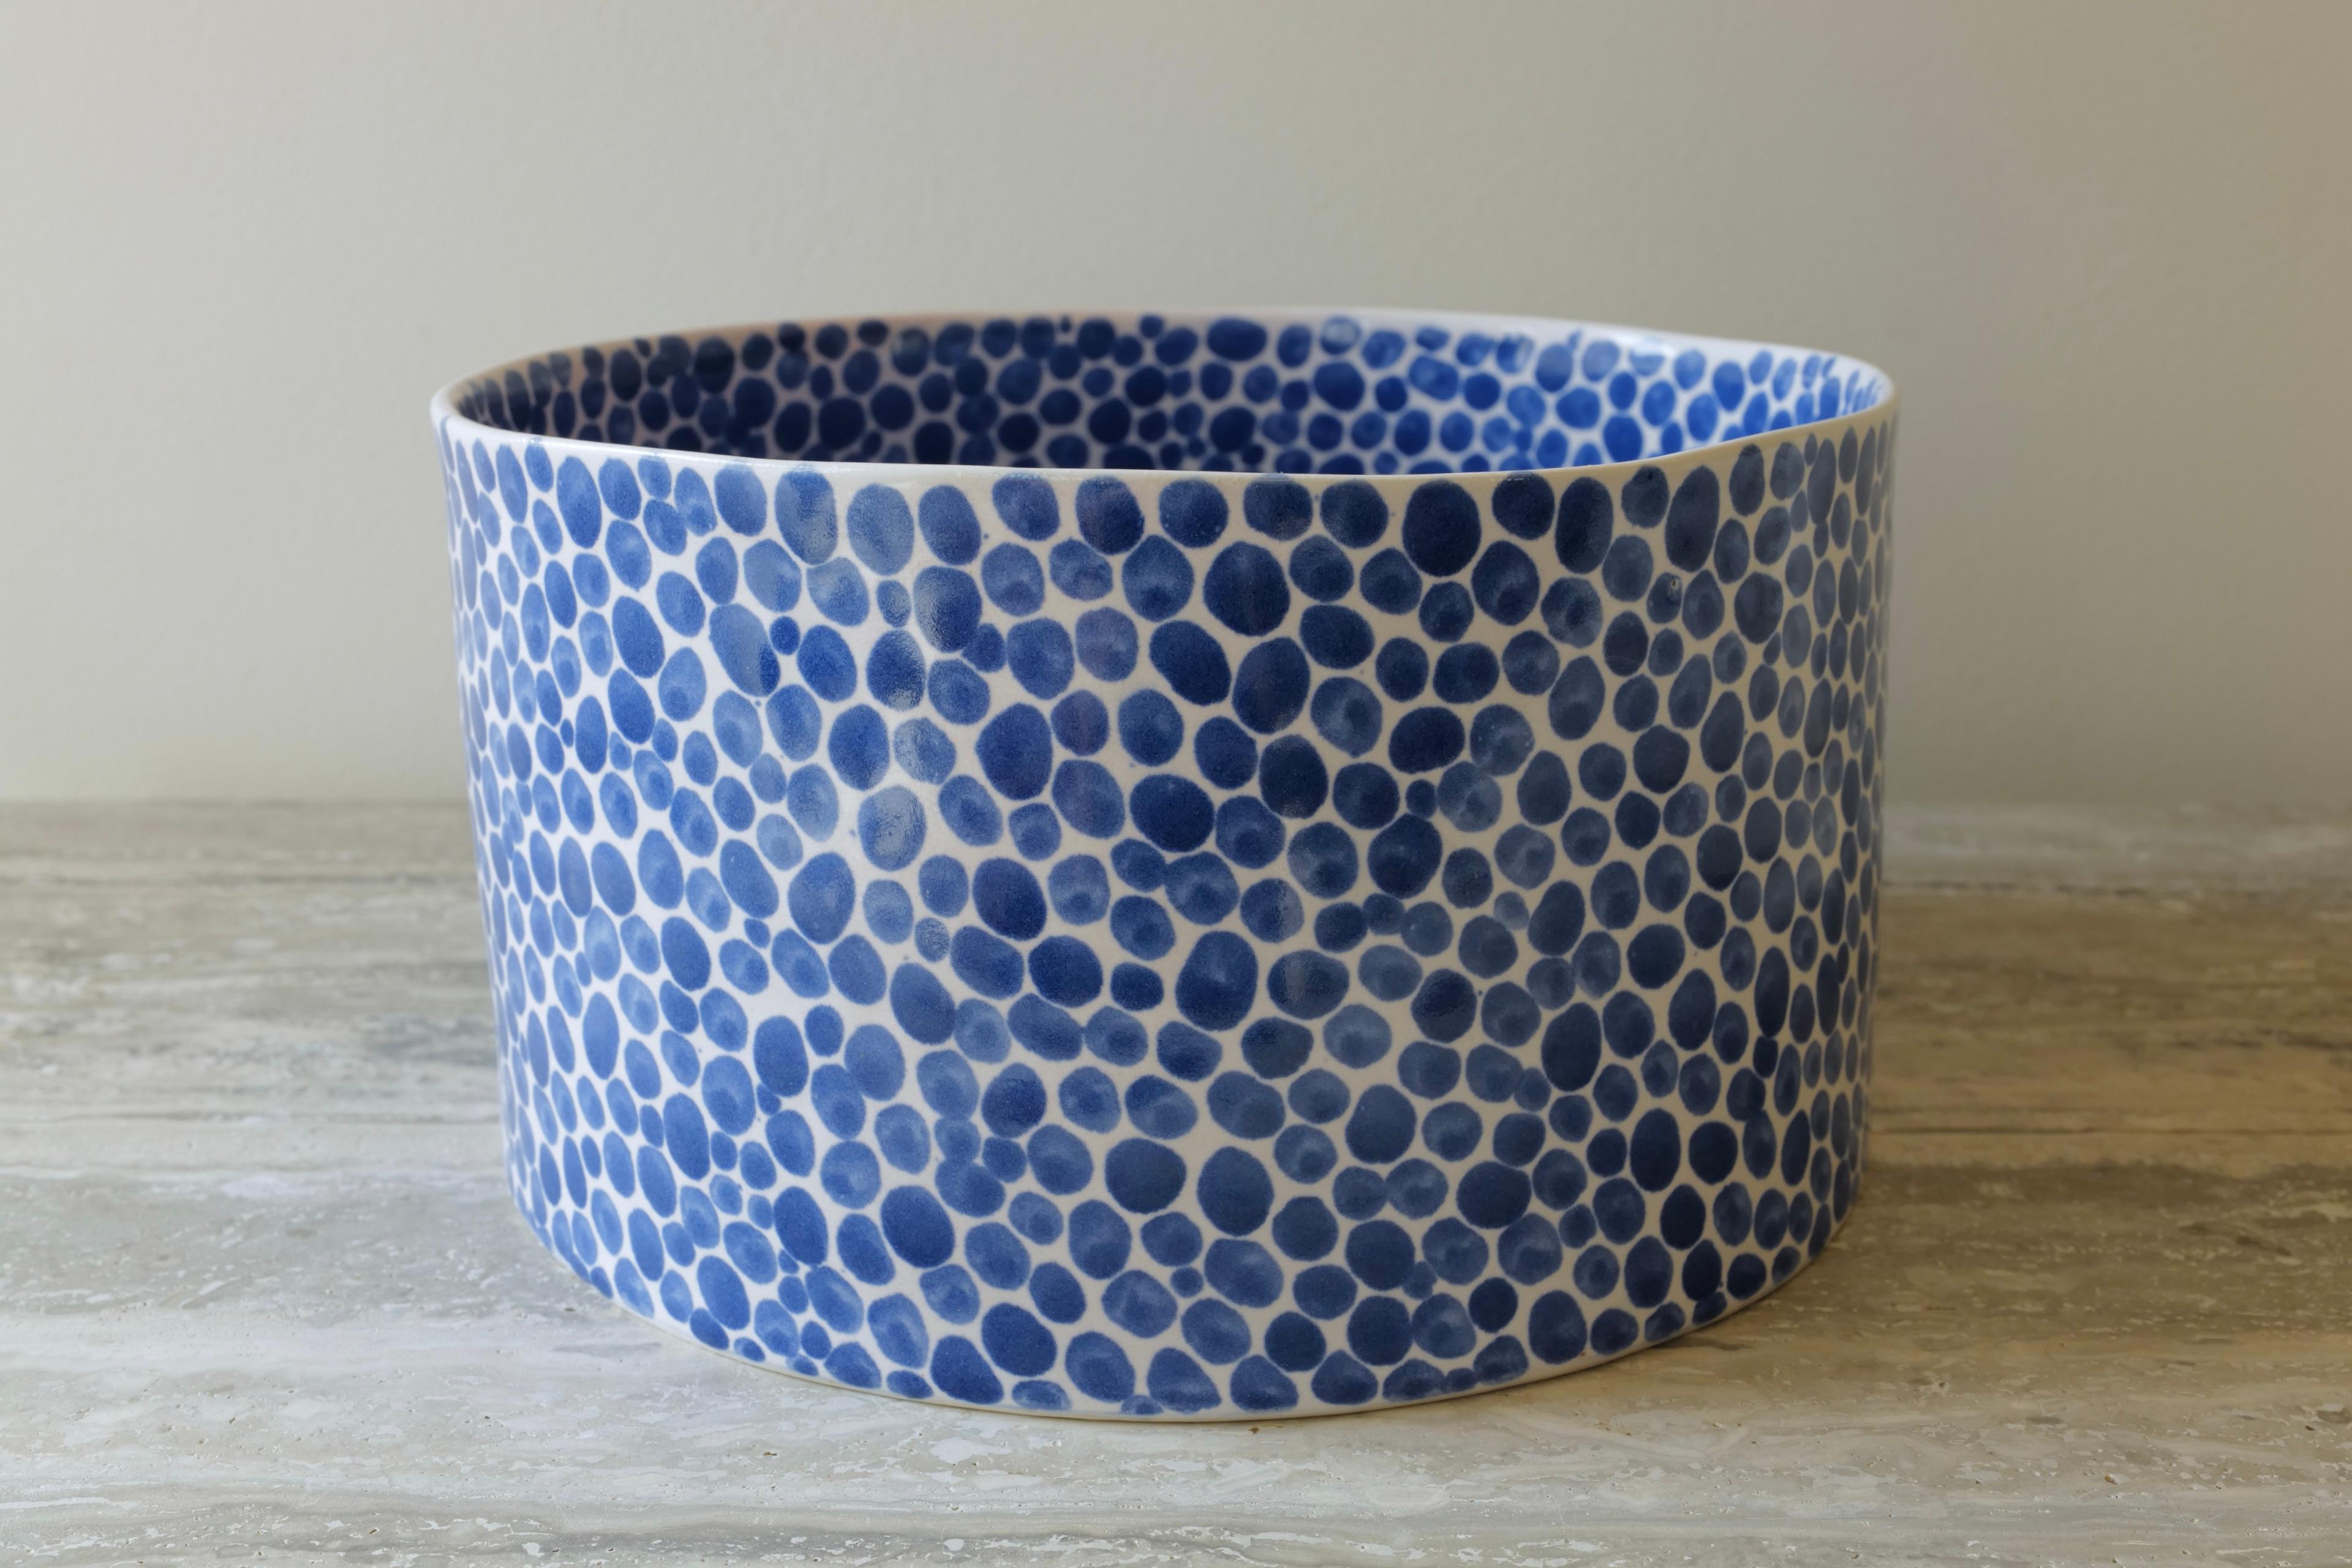 This multi-functional ceramic bowl is perfect for fruits or vegetables as well as for flowers as a wide, deep vase. Hand-cast in porcelain and once bisque fired, each dot is hand-painted with a traditional cobalt blue glaze. An unconventional